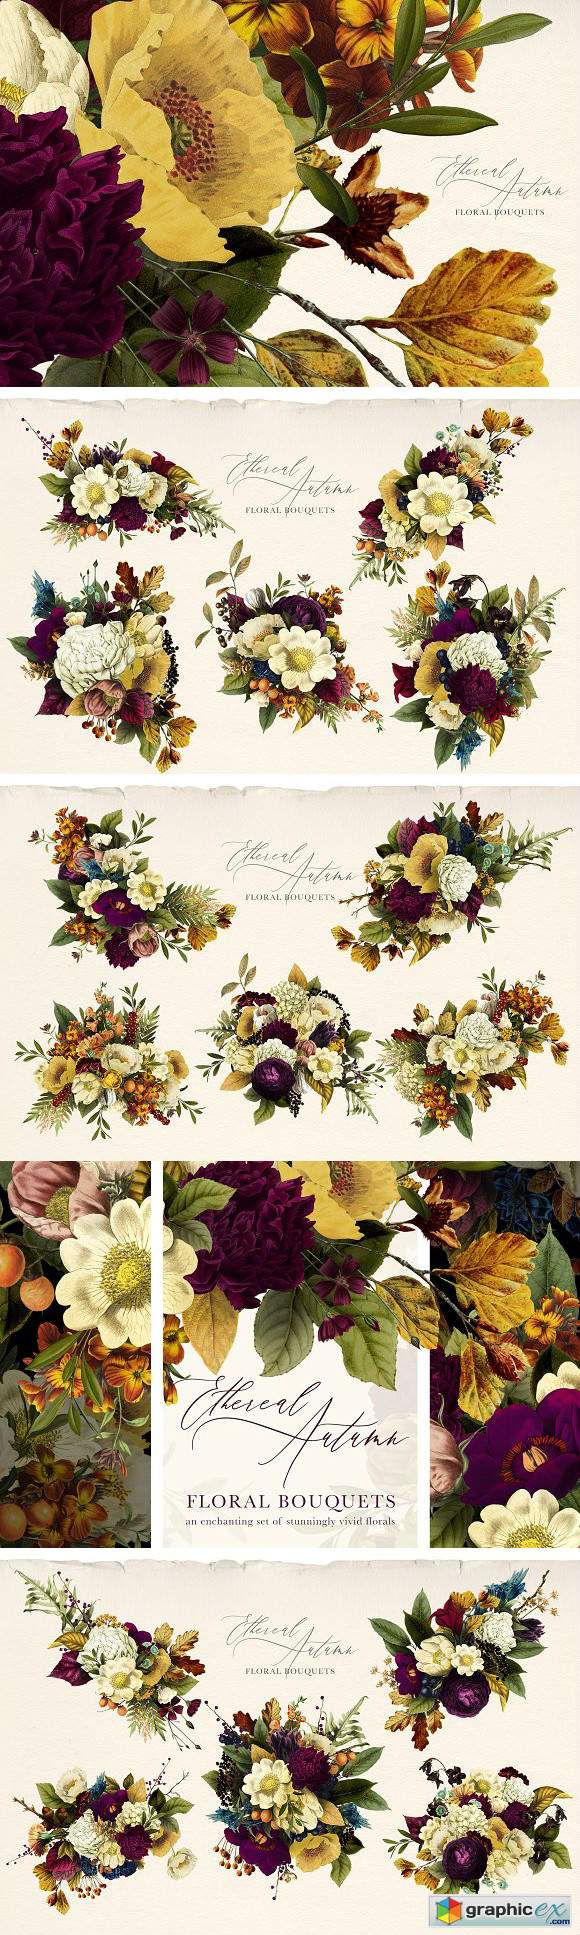 Ethereal Autumn Floral Bouquets